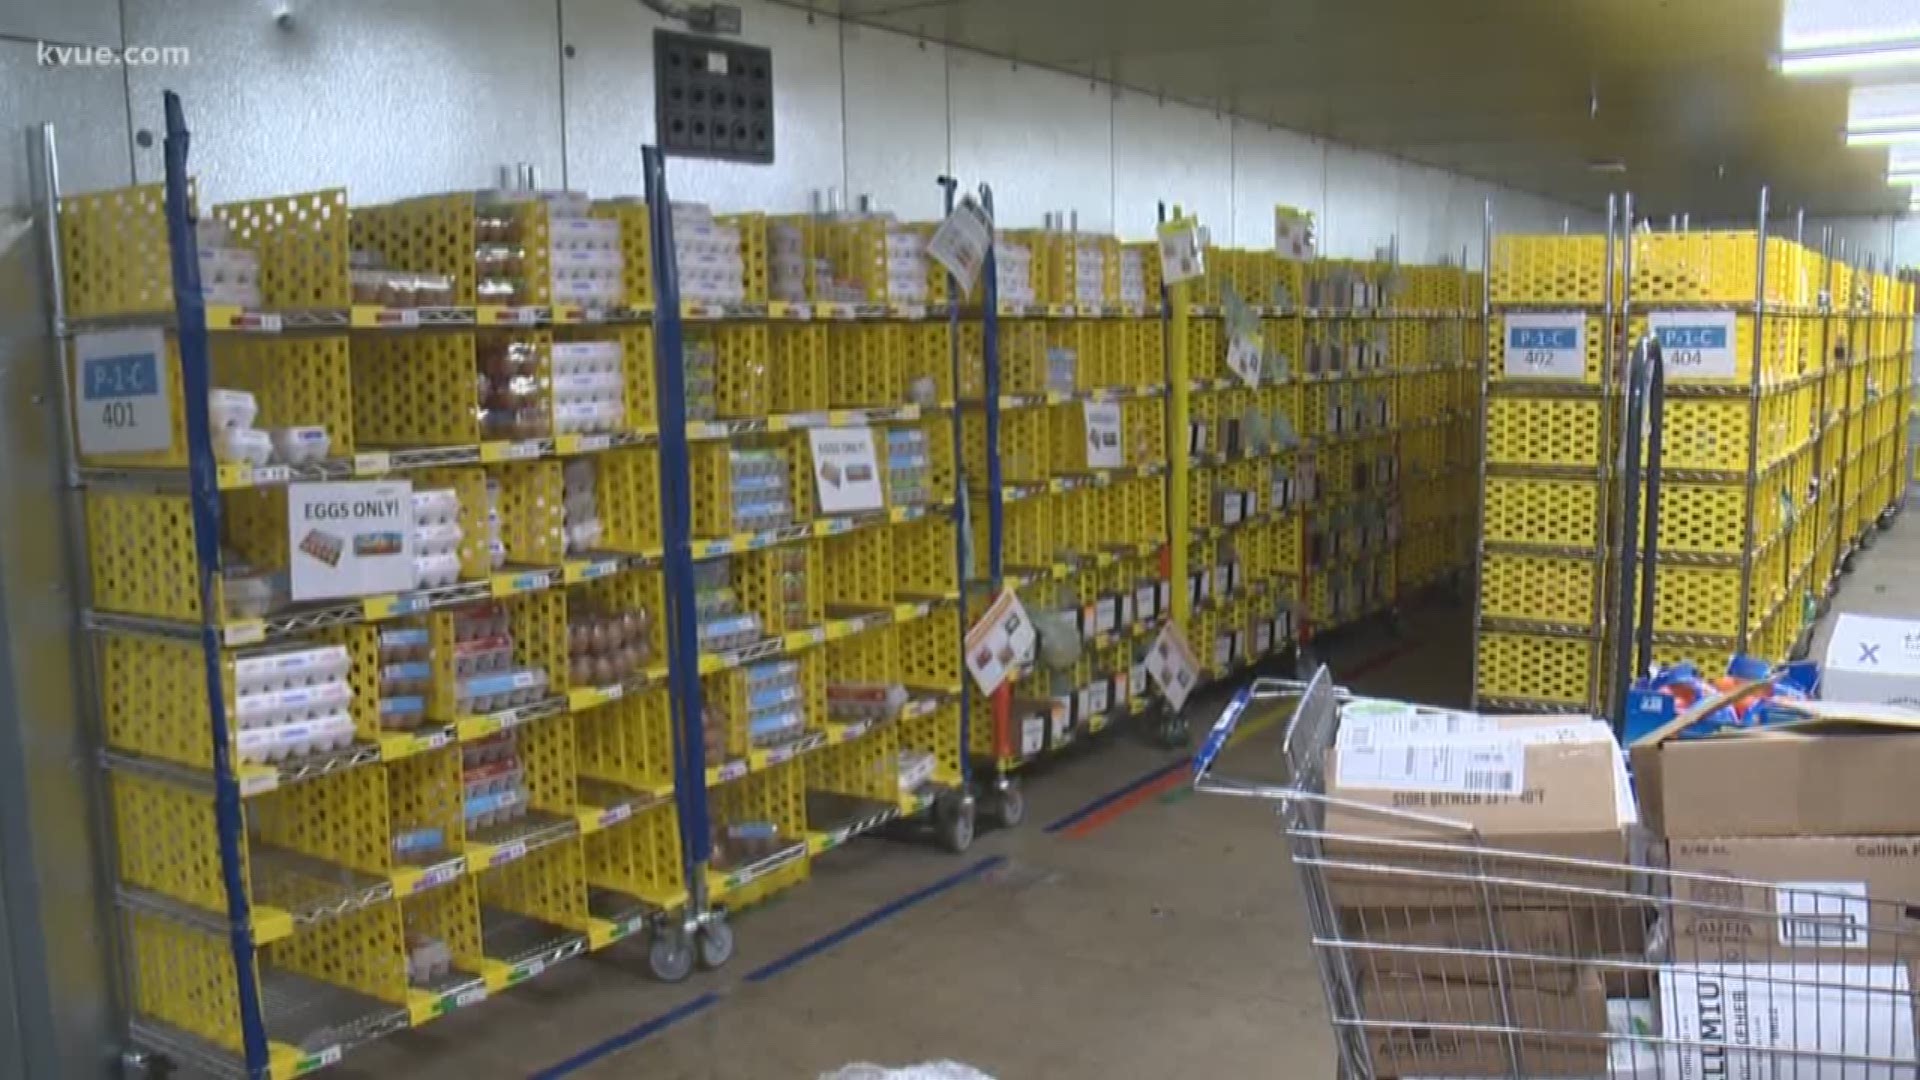 As we try to remember everything that needs to get done during the holidays, there's usually that one thing we forget. Austin is home to an Amazon Prime Hub, and KVUE got a look inside.